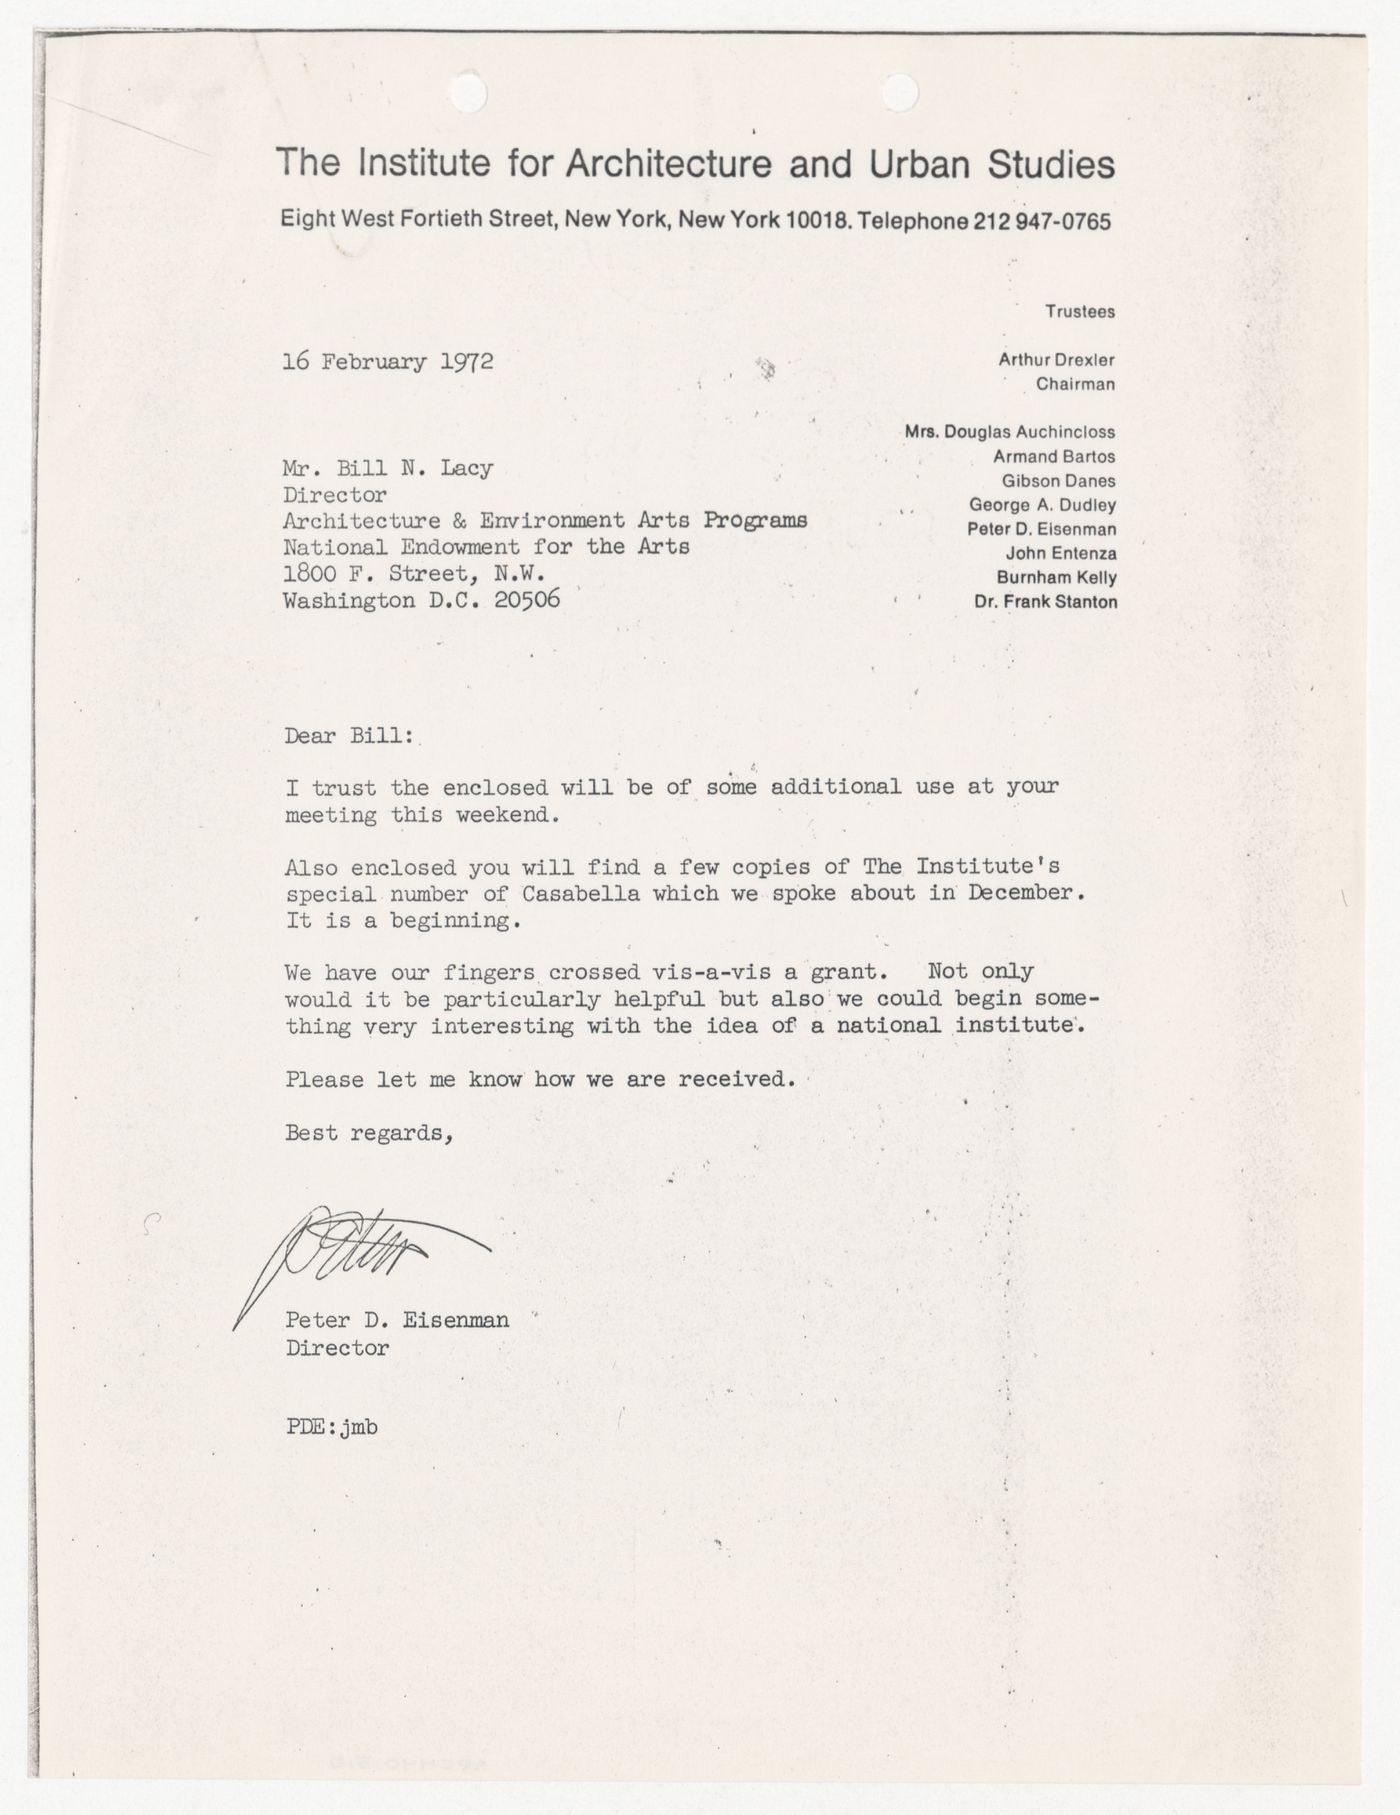 Letter from Peter D. Eisenman to Bill N. Lacy